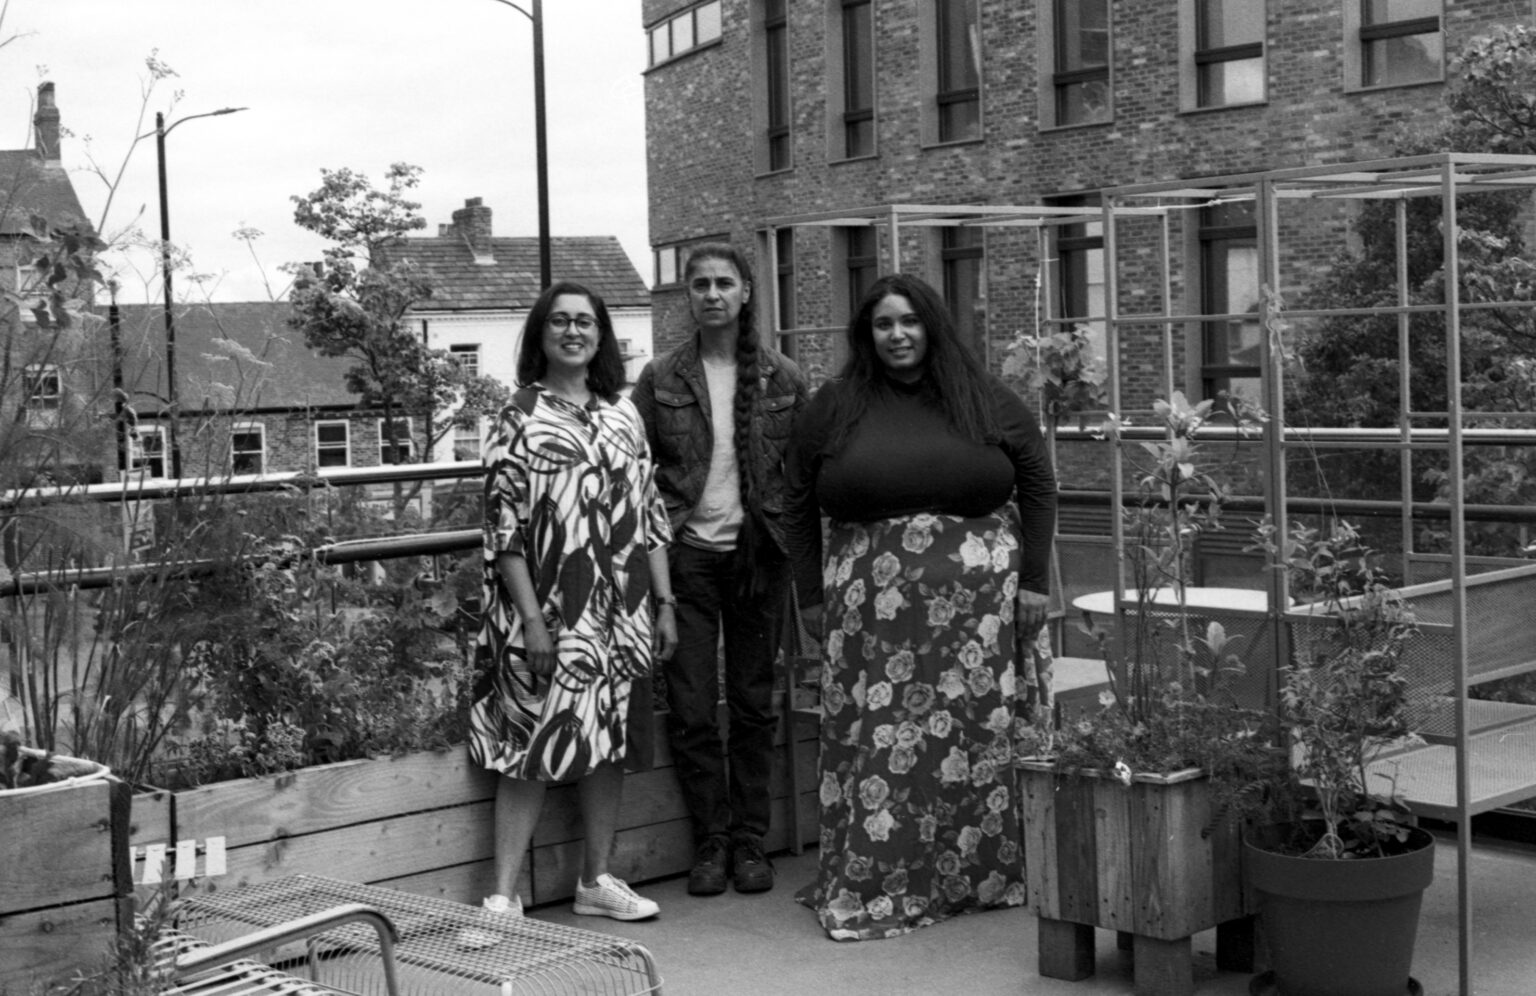 A black and white photo of three women standing together on an outdoor terrace.